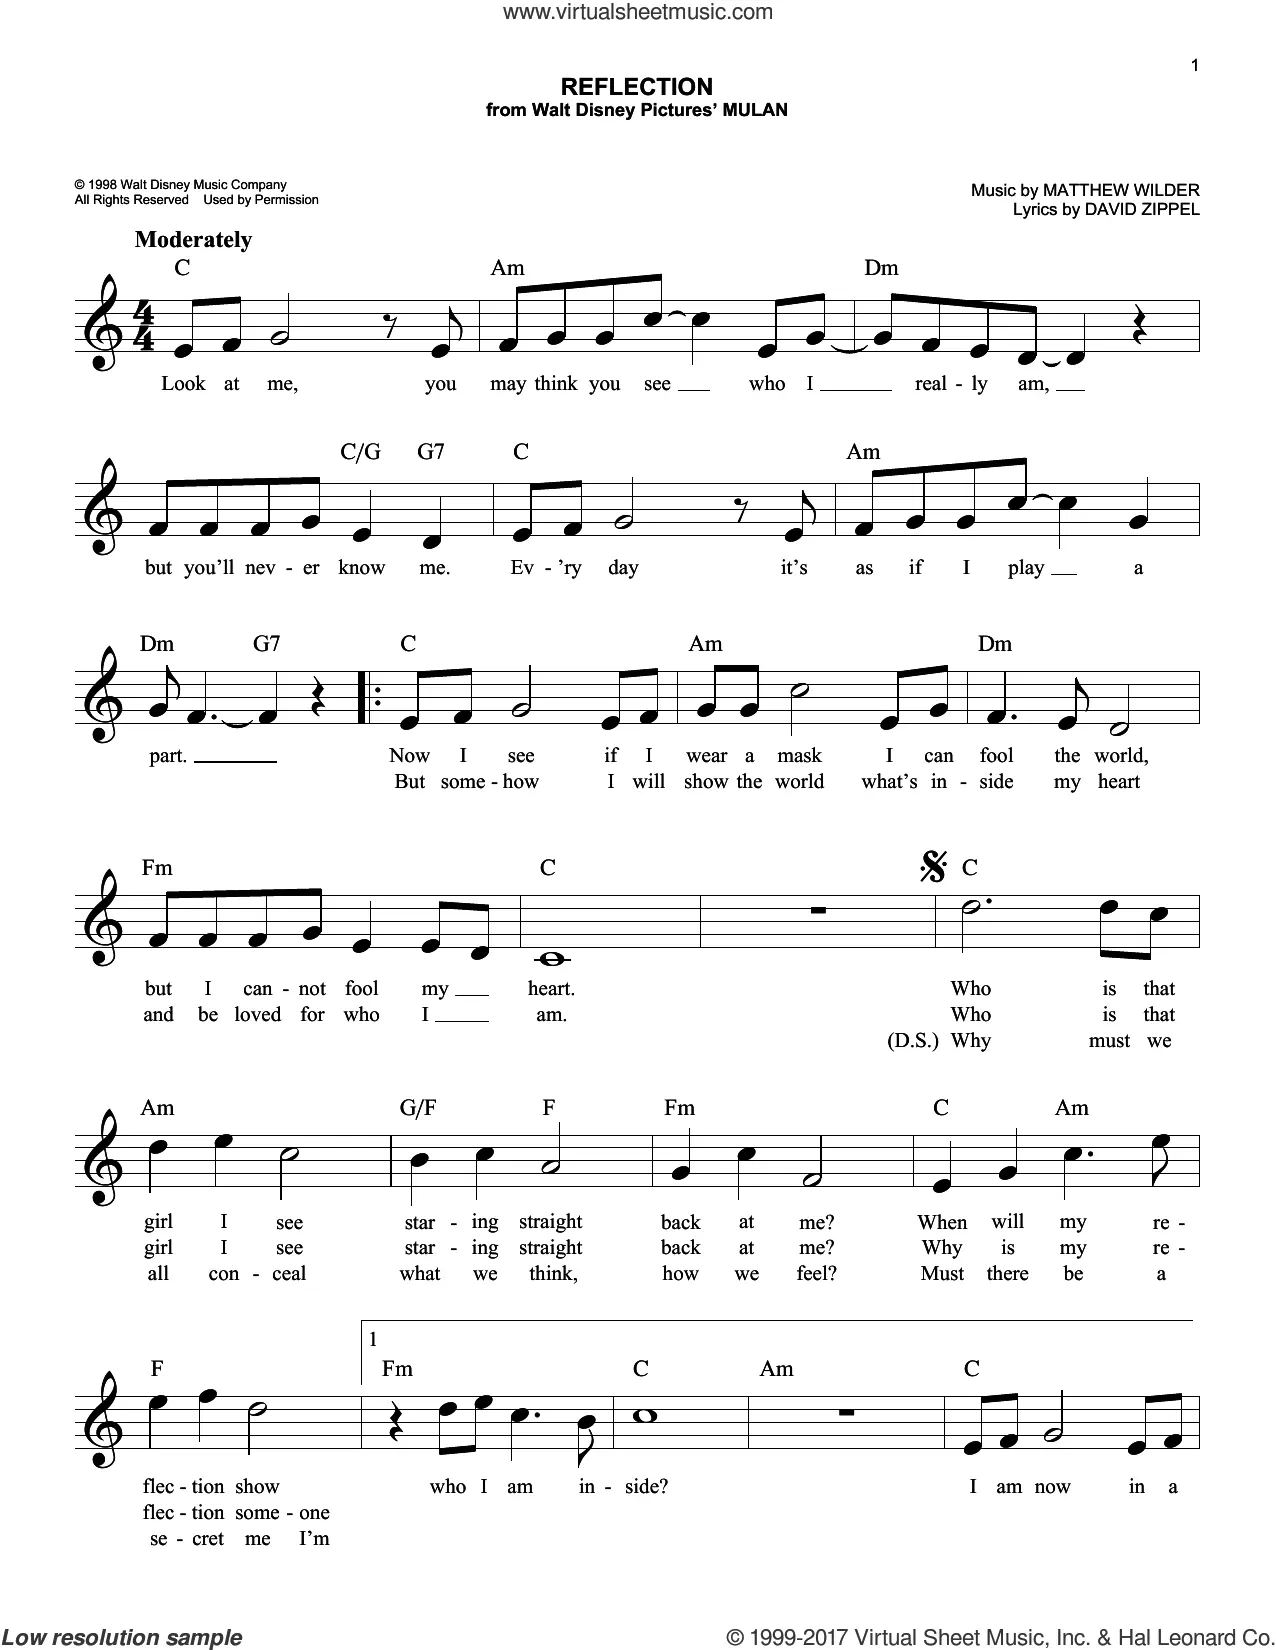 Love Will Find a Way" Sheet Music by Christina Aguilera for  Piano/Vocal/Chords - Sheet Music Now